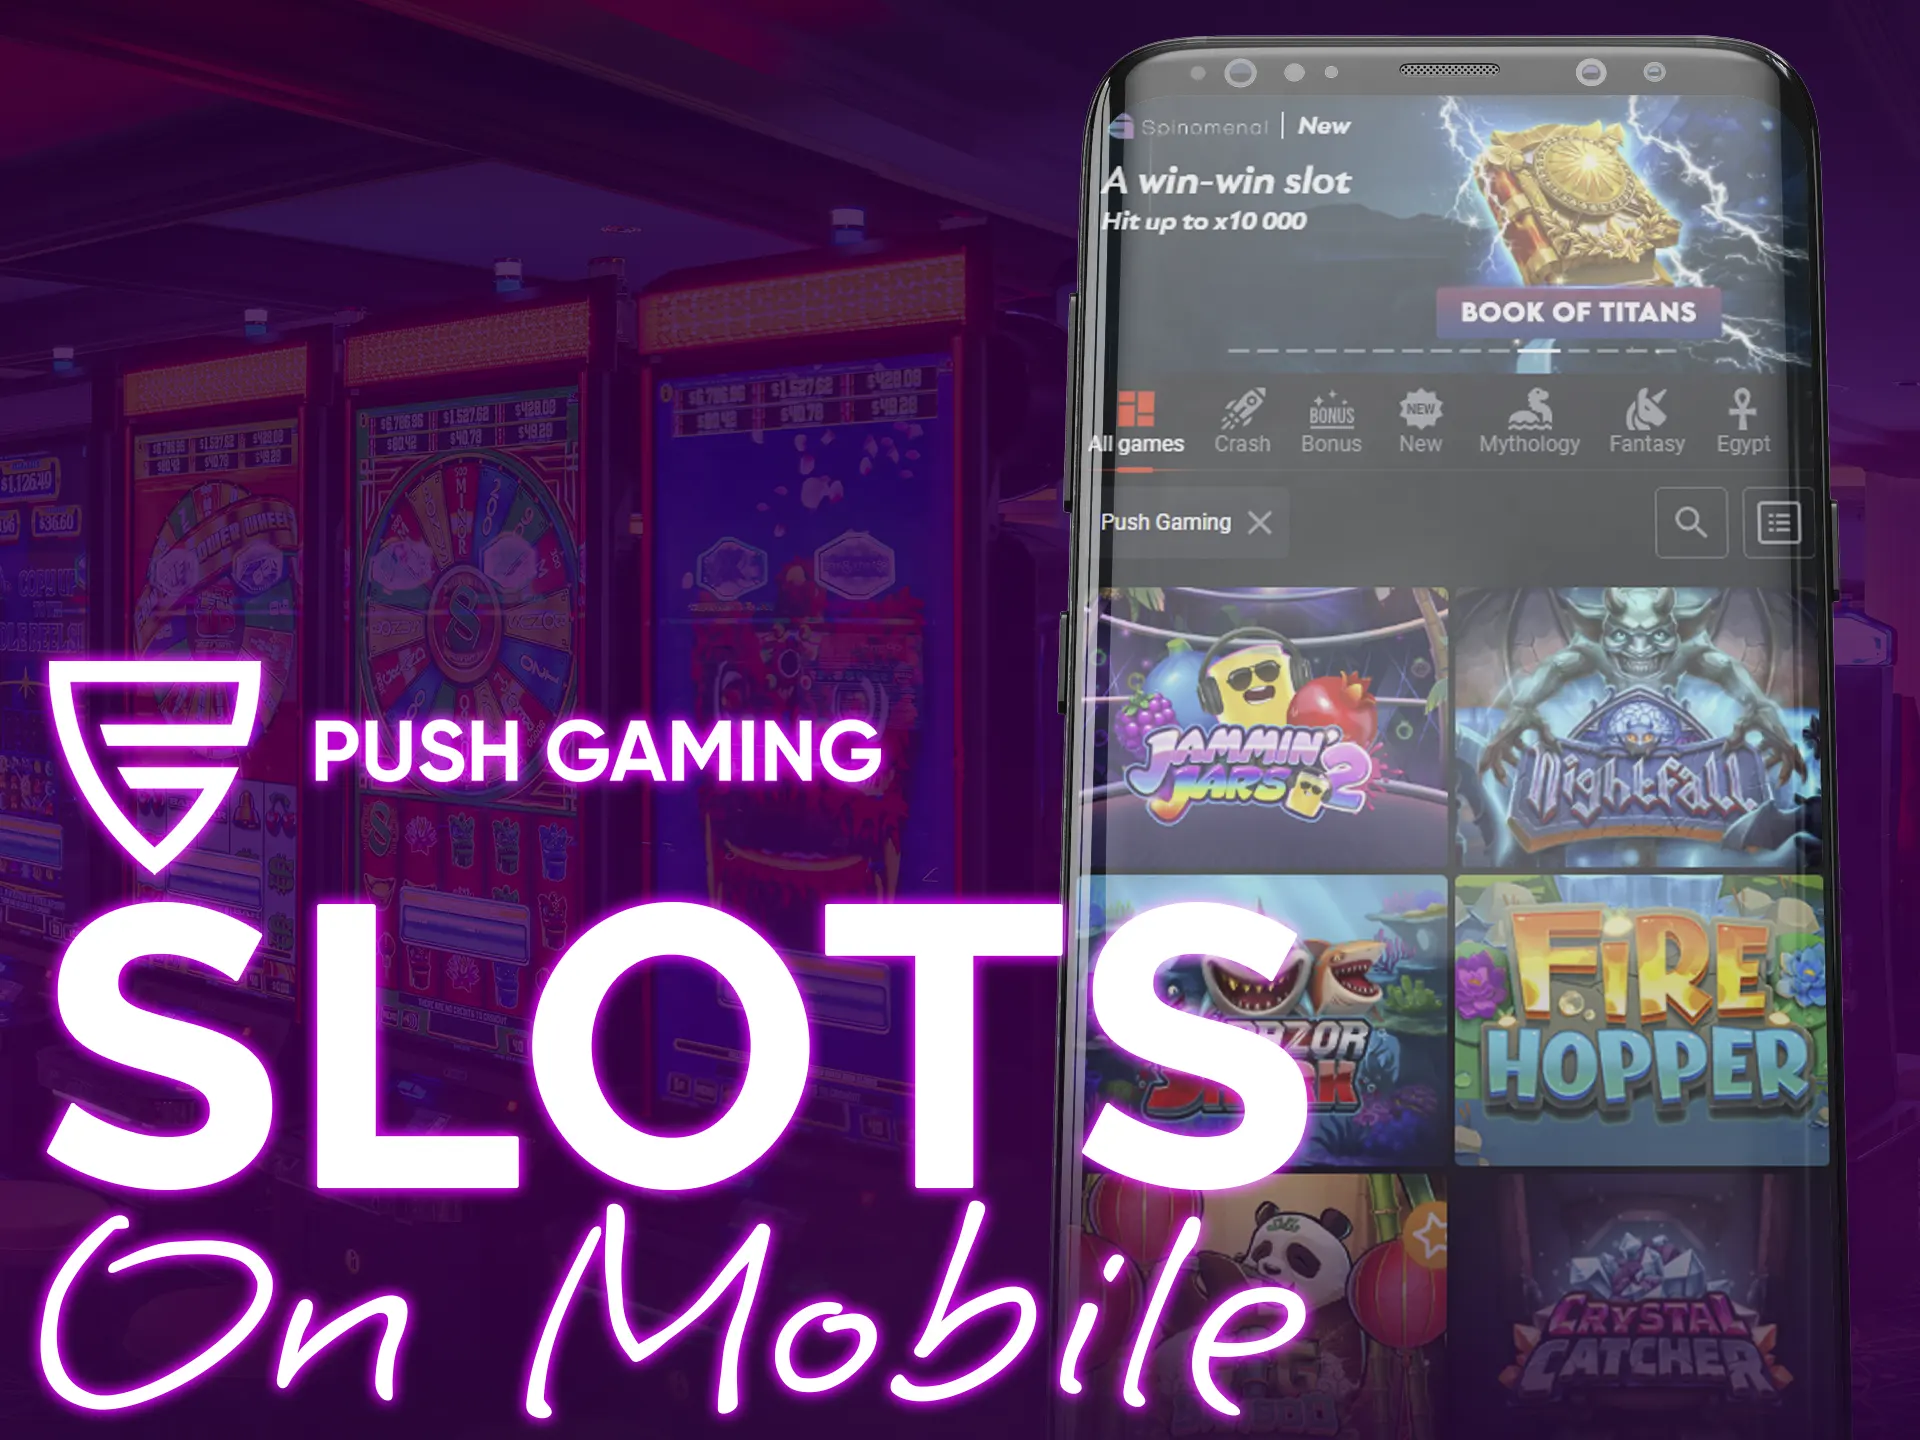 You can use the option to play slots from mobile devices.